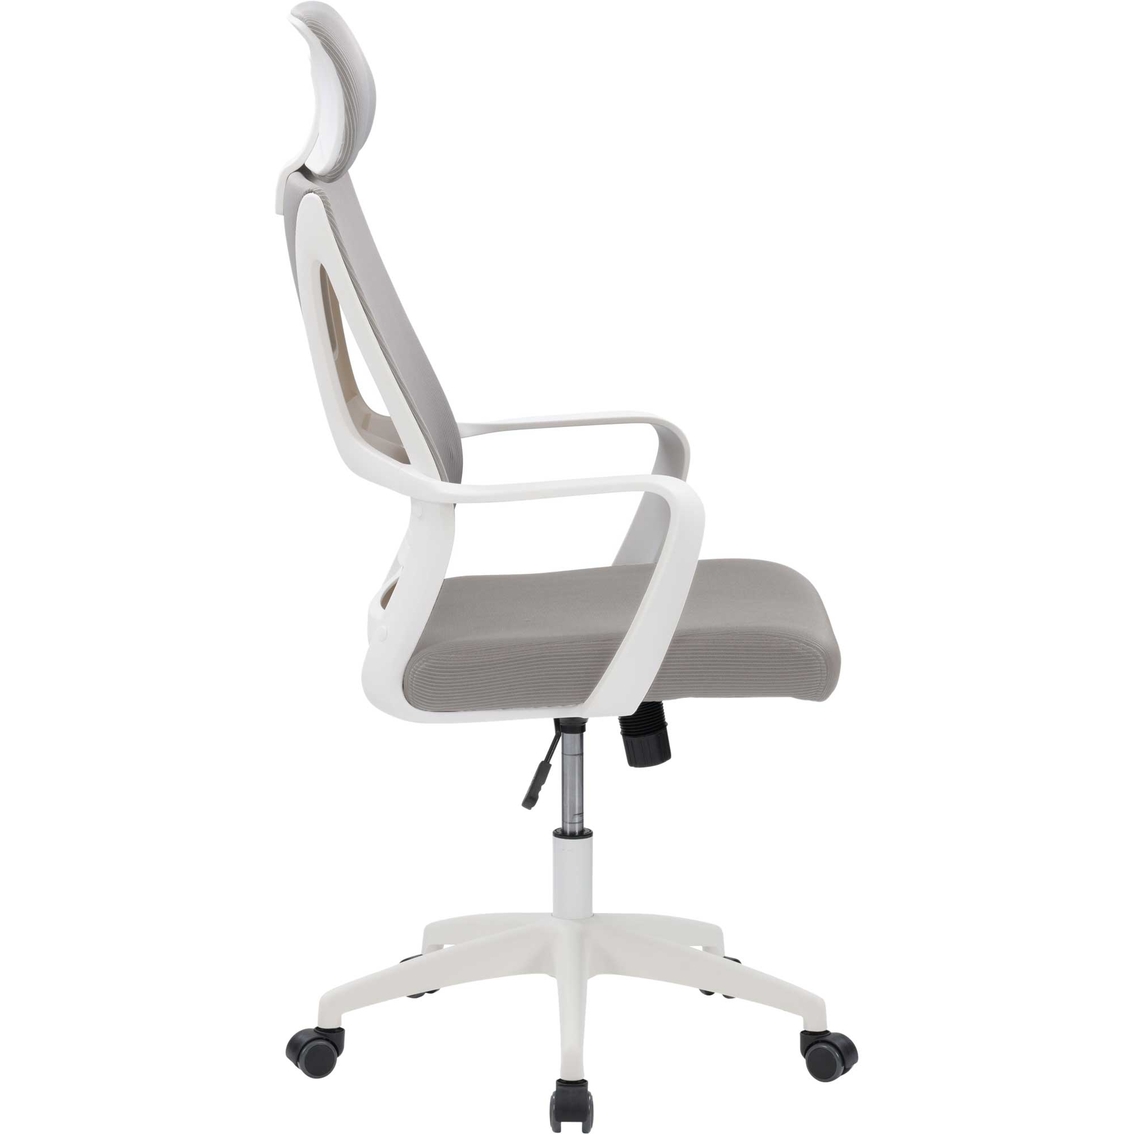 CorLiving Workspace Mesh Back Office Chair - Image 3 of 7